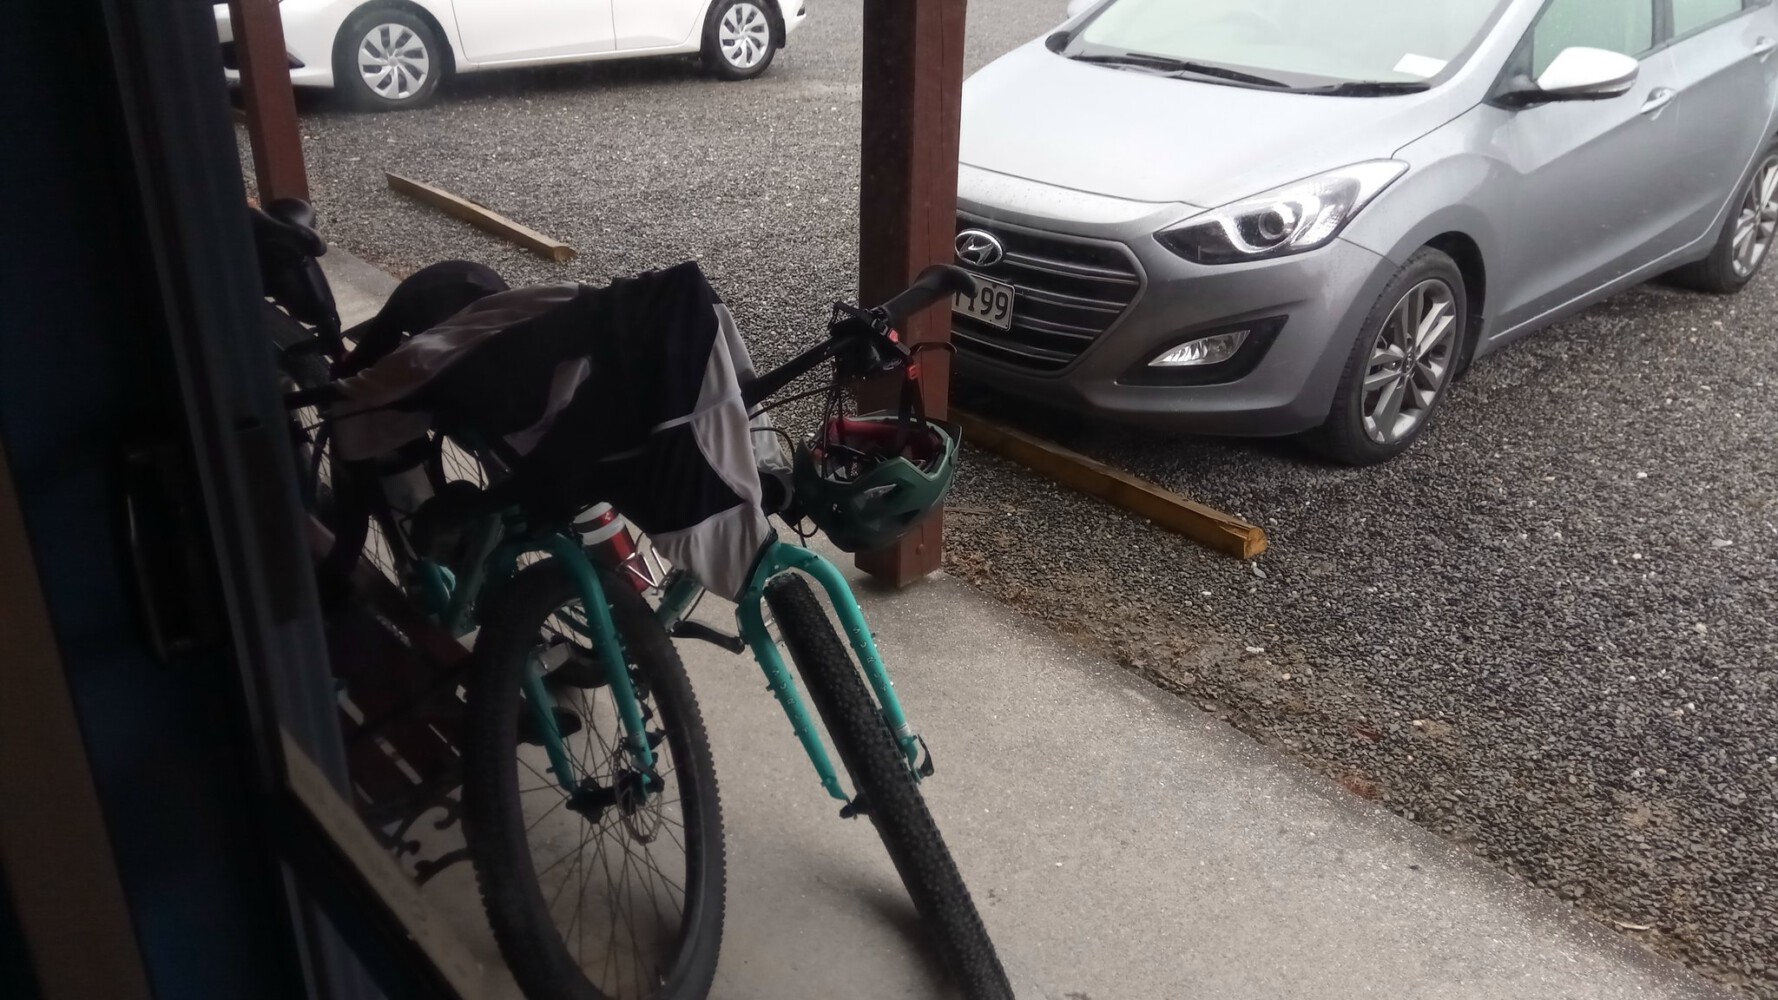 Our bikes in front of our second stay in Haast.